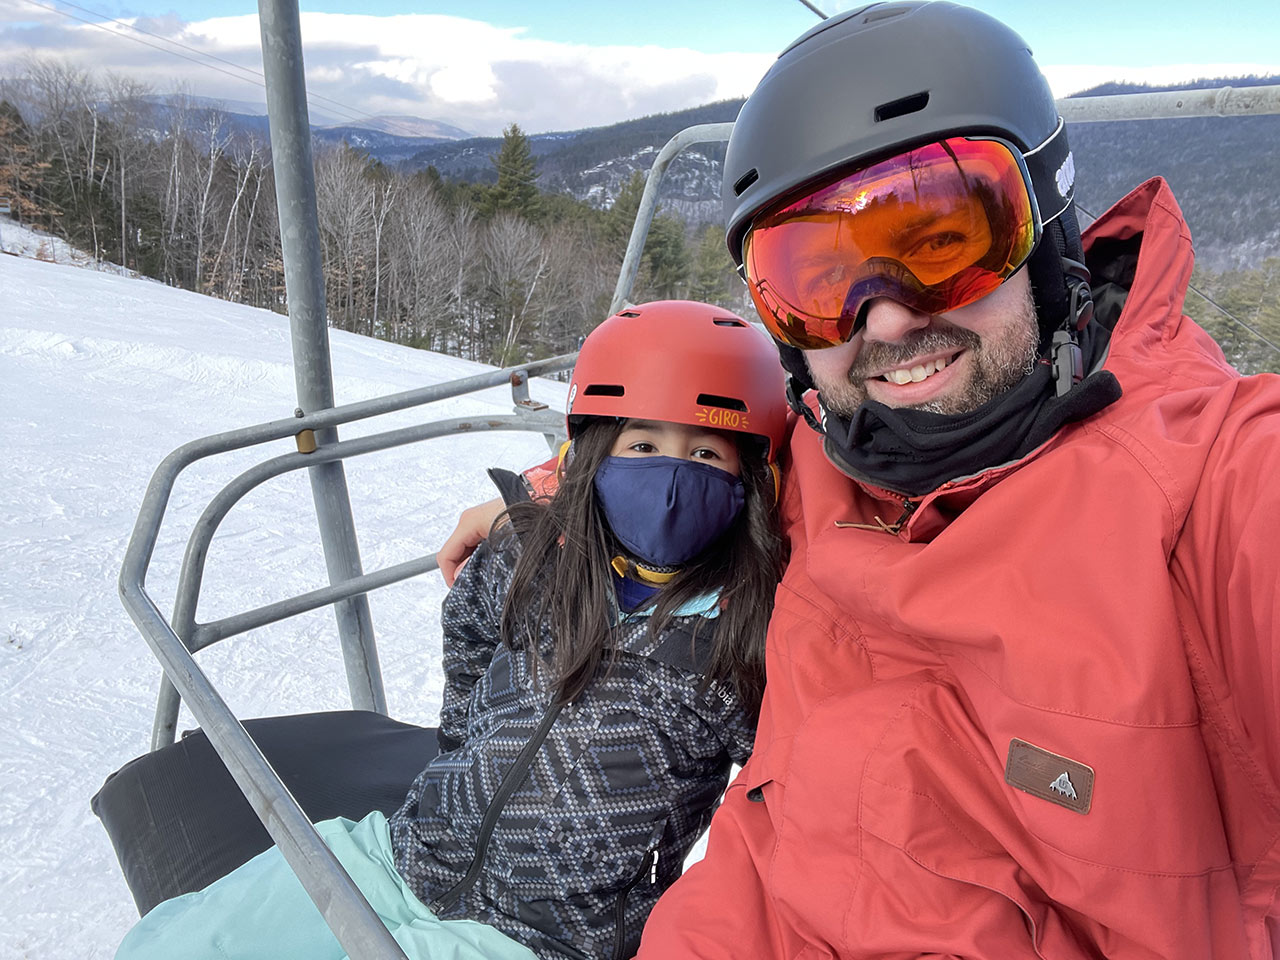 Daddy daughter chairlift